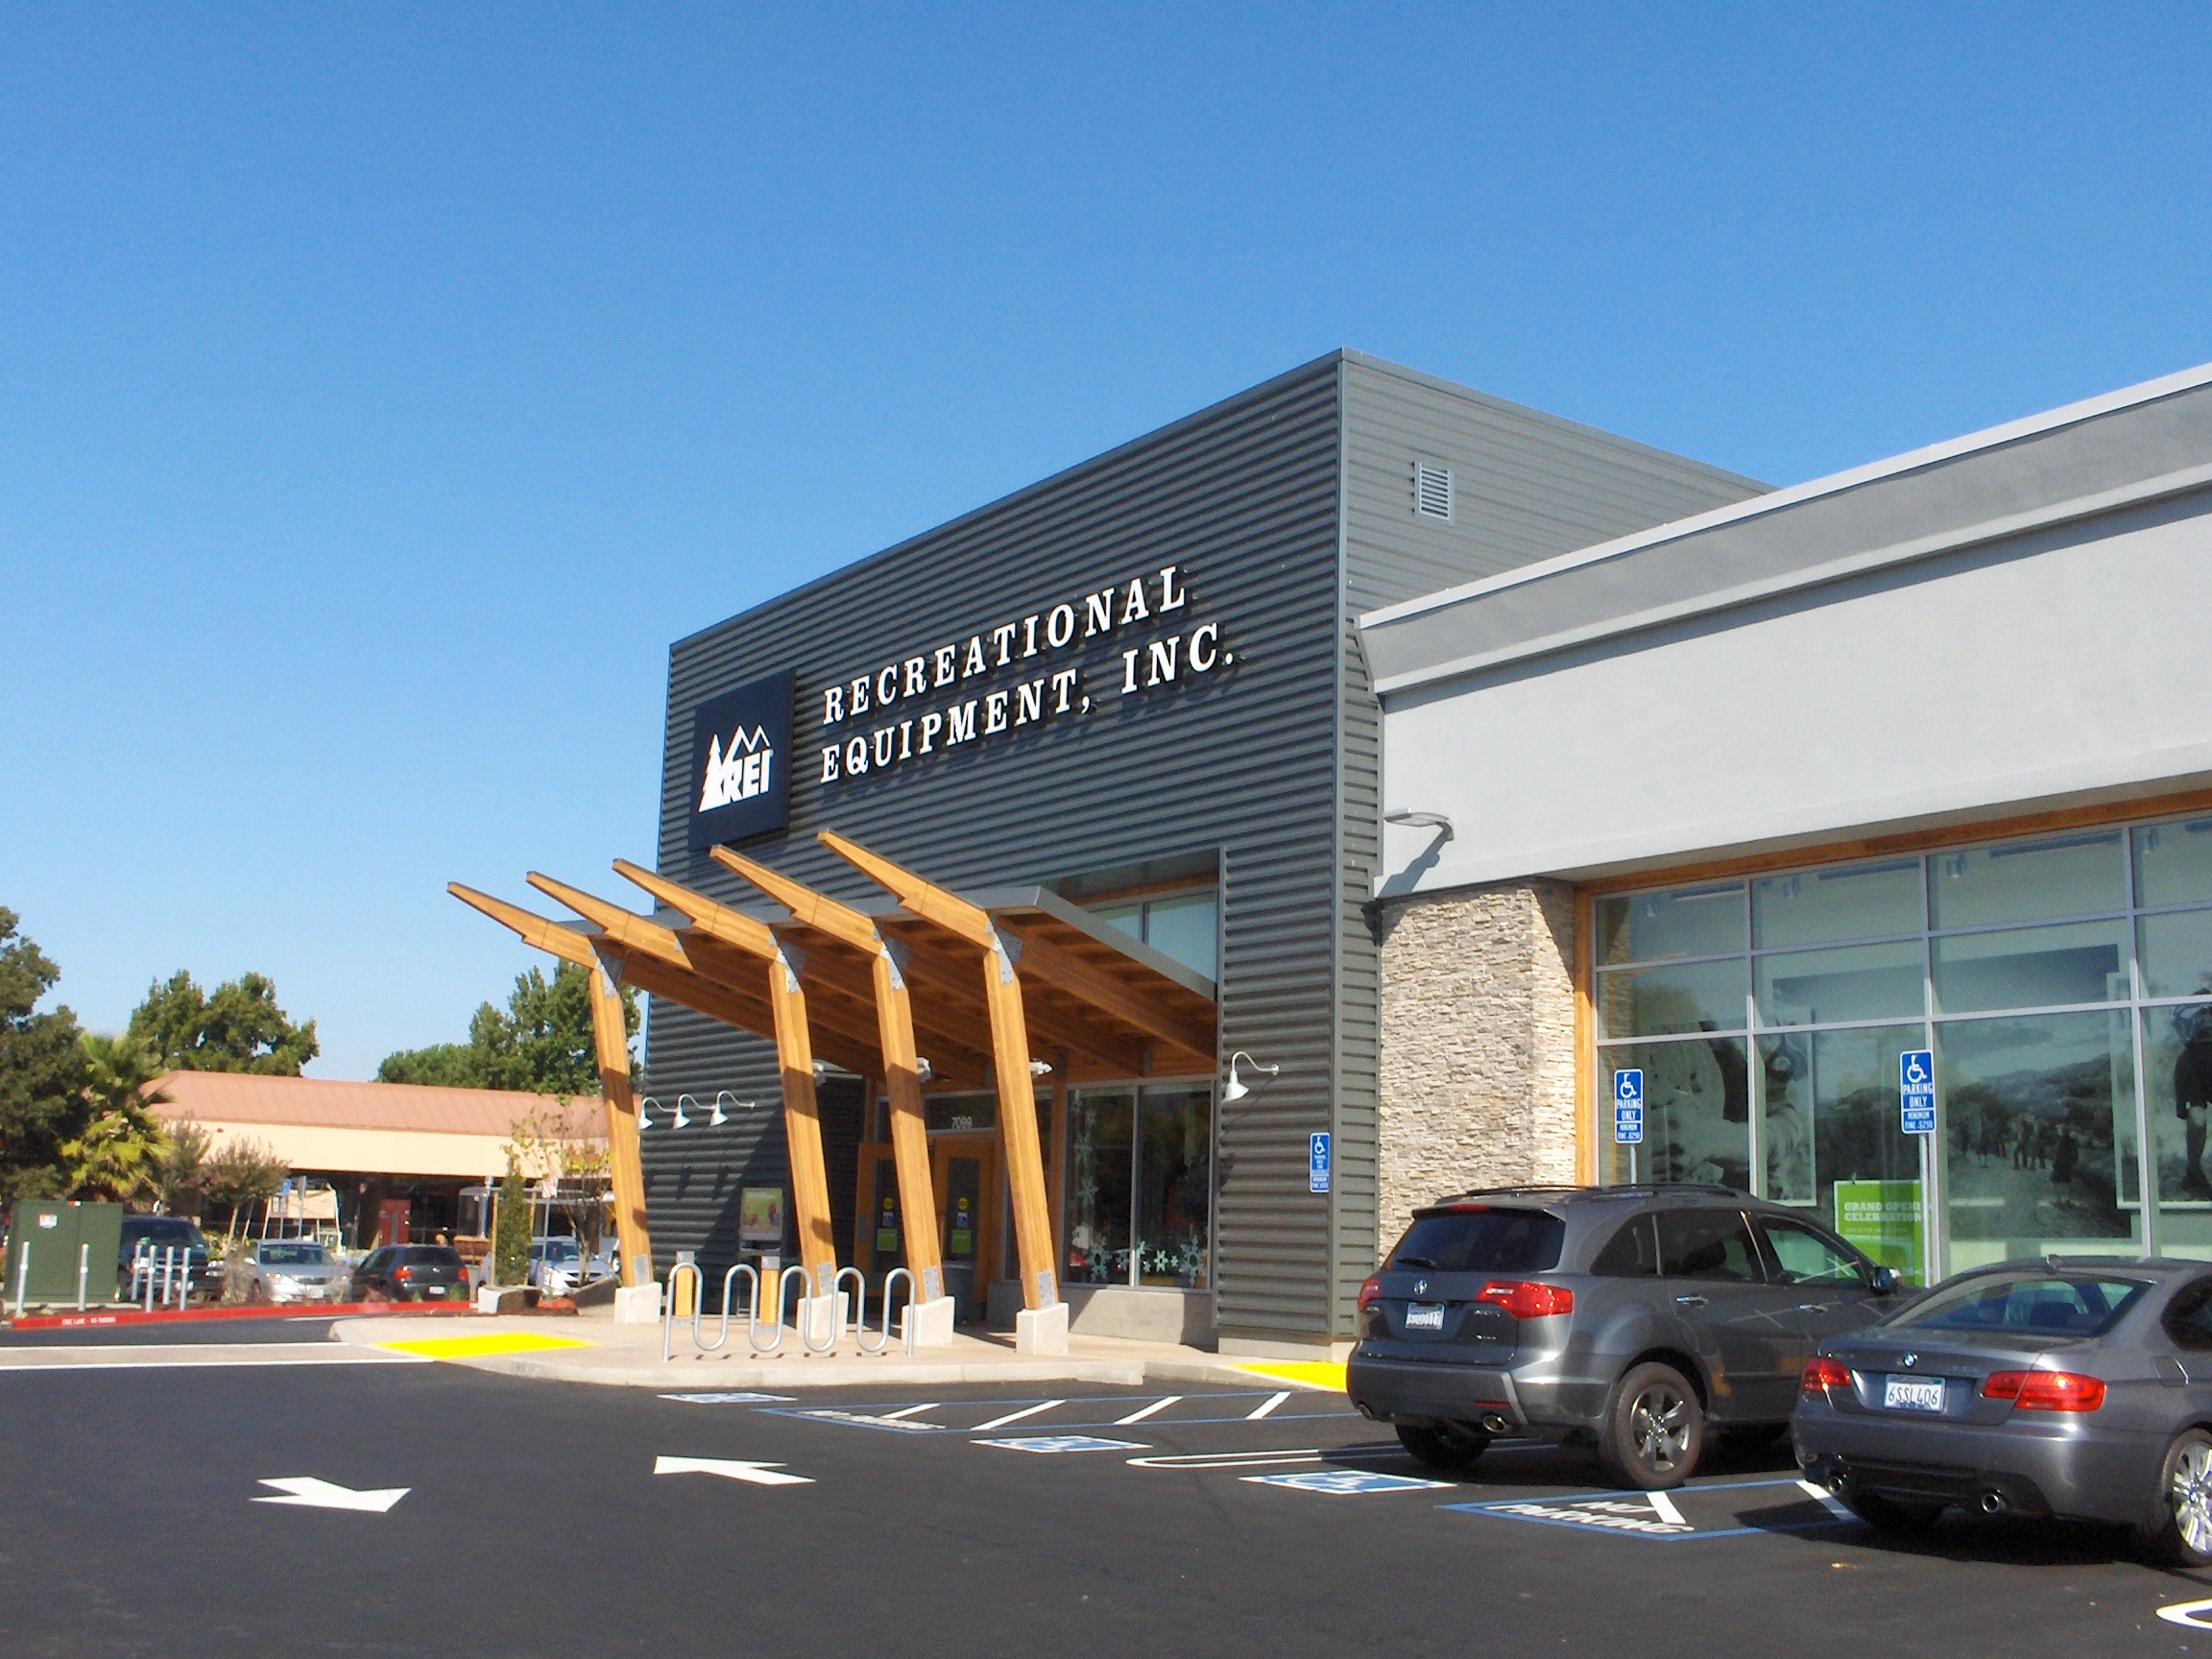 REI Charts Sustainable Path With Updated Standards Around PFAS